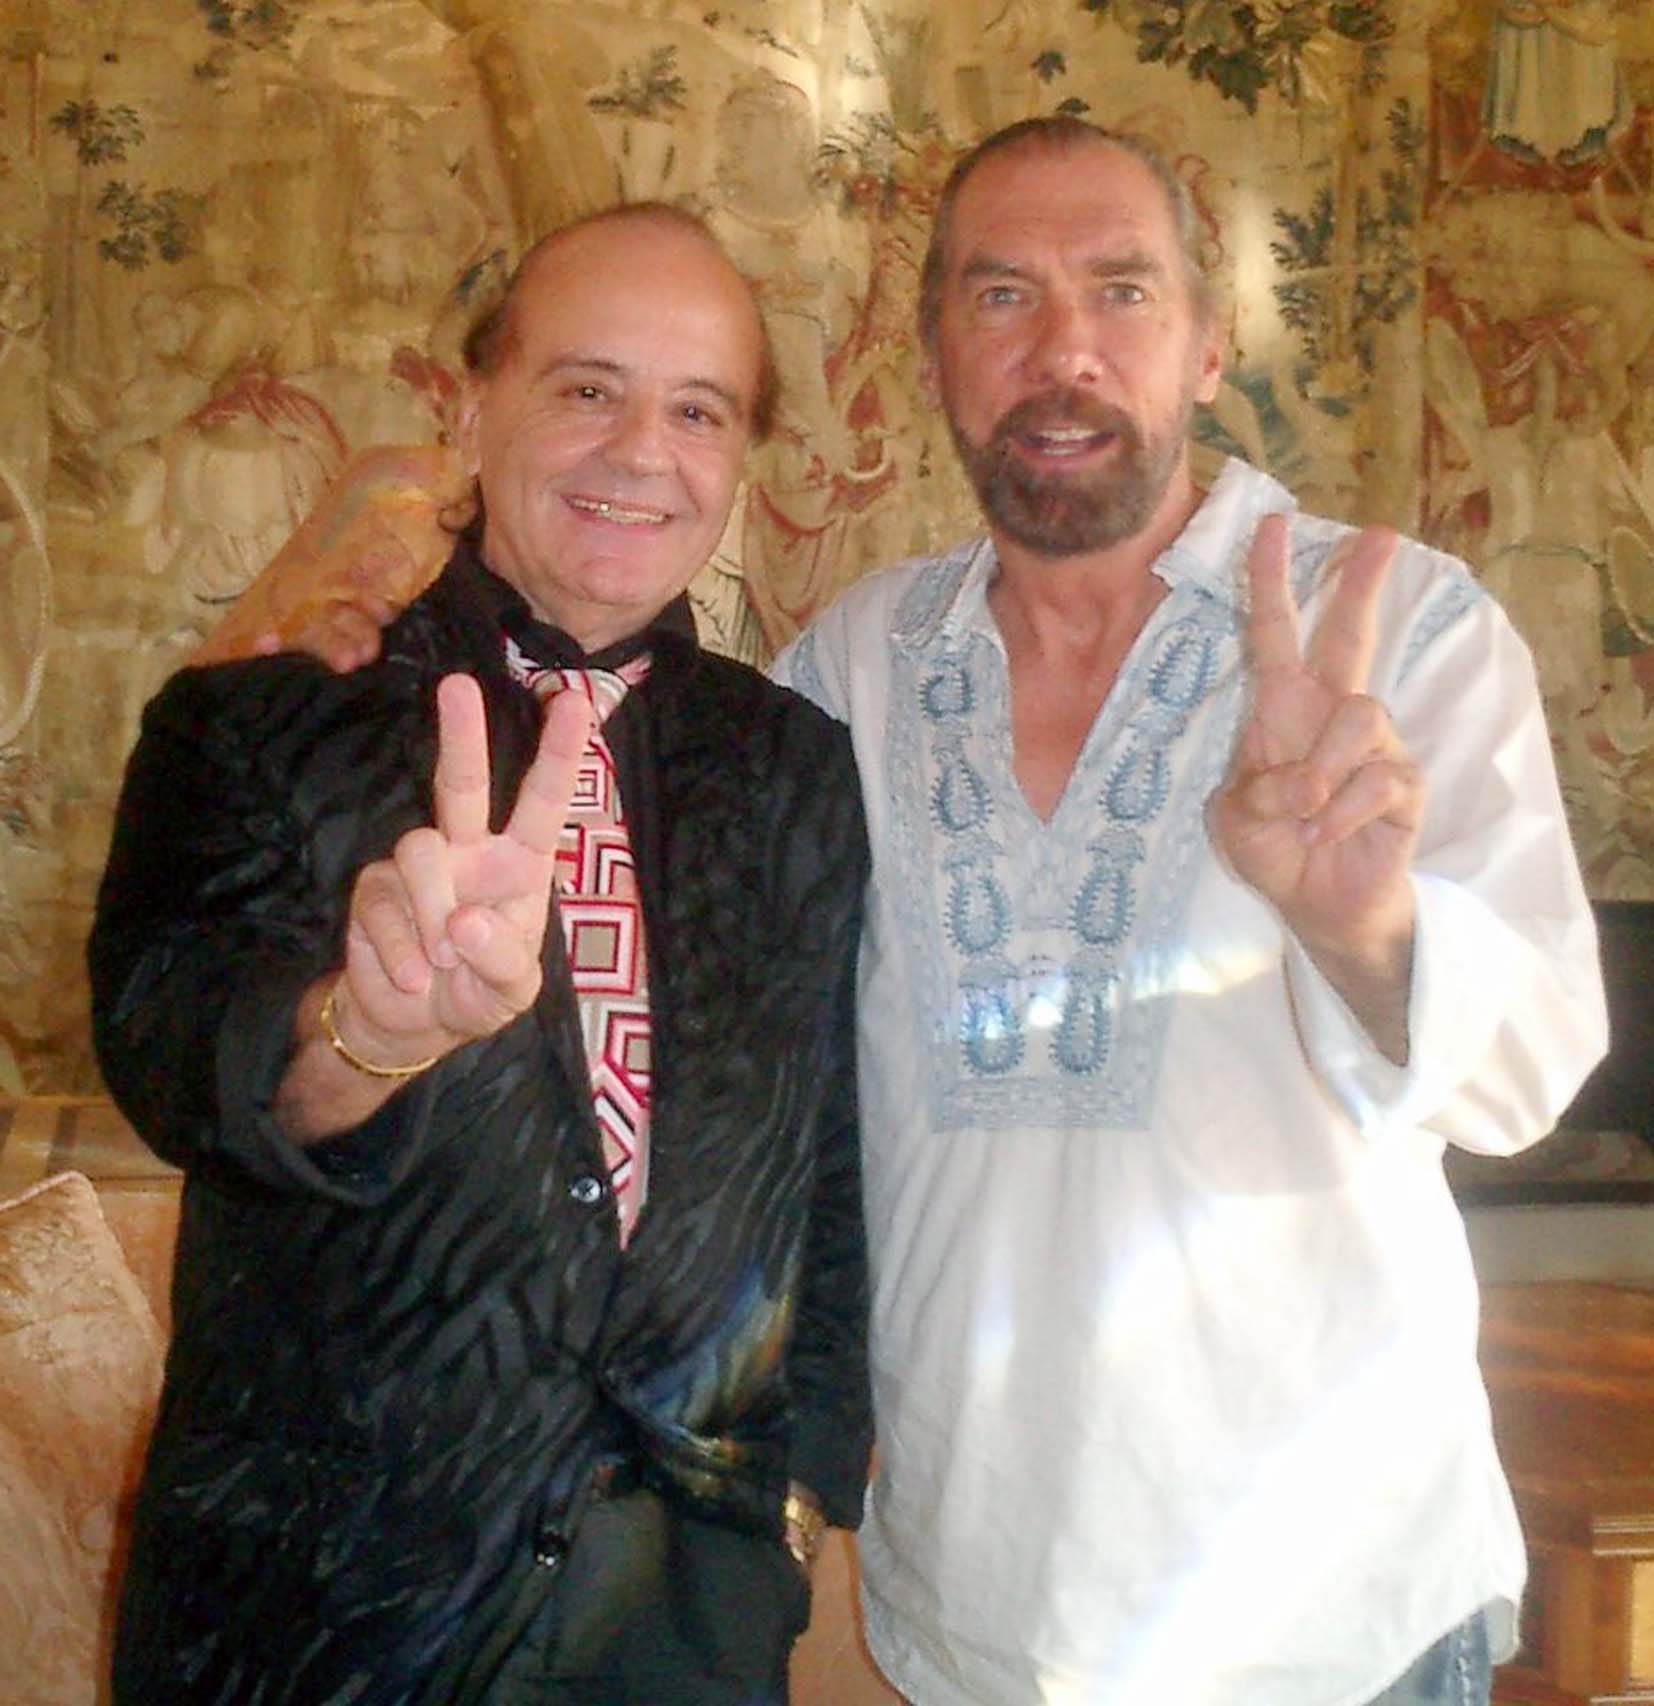 Jorg Bobsin and JOHN PAUL DEJORIA, Founder, Chairman & CEO of Paul Mitchell, for 